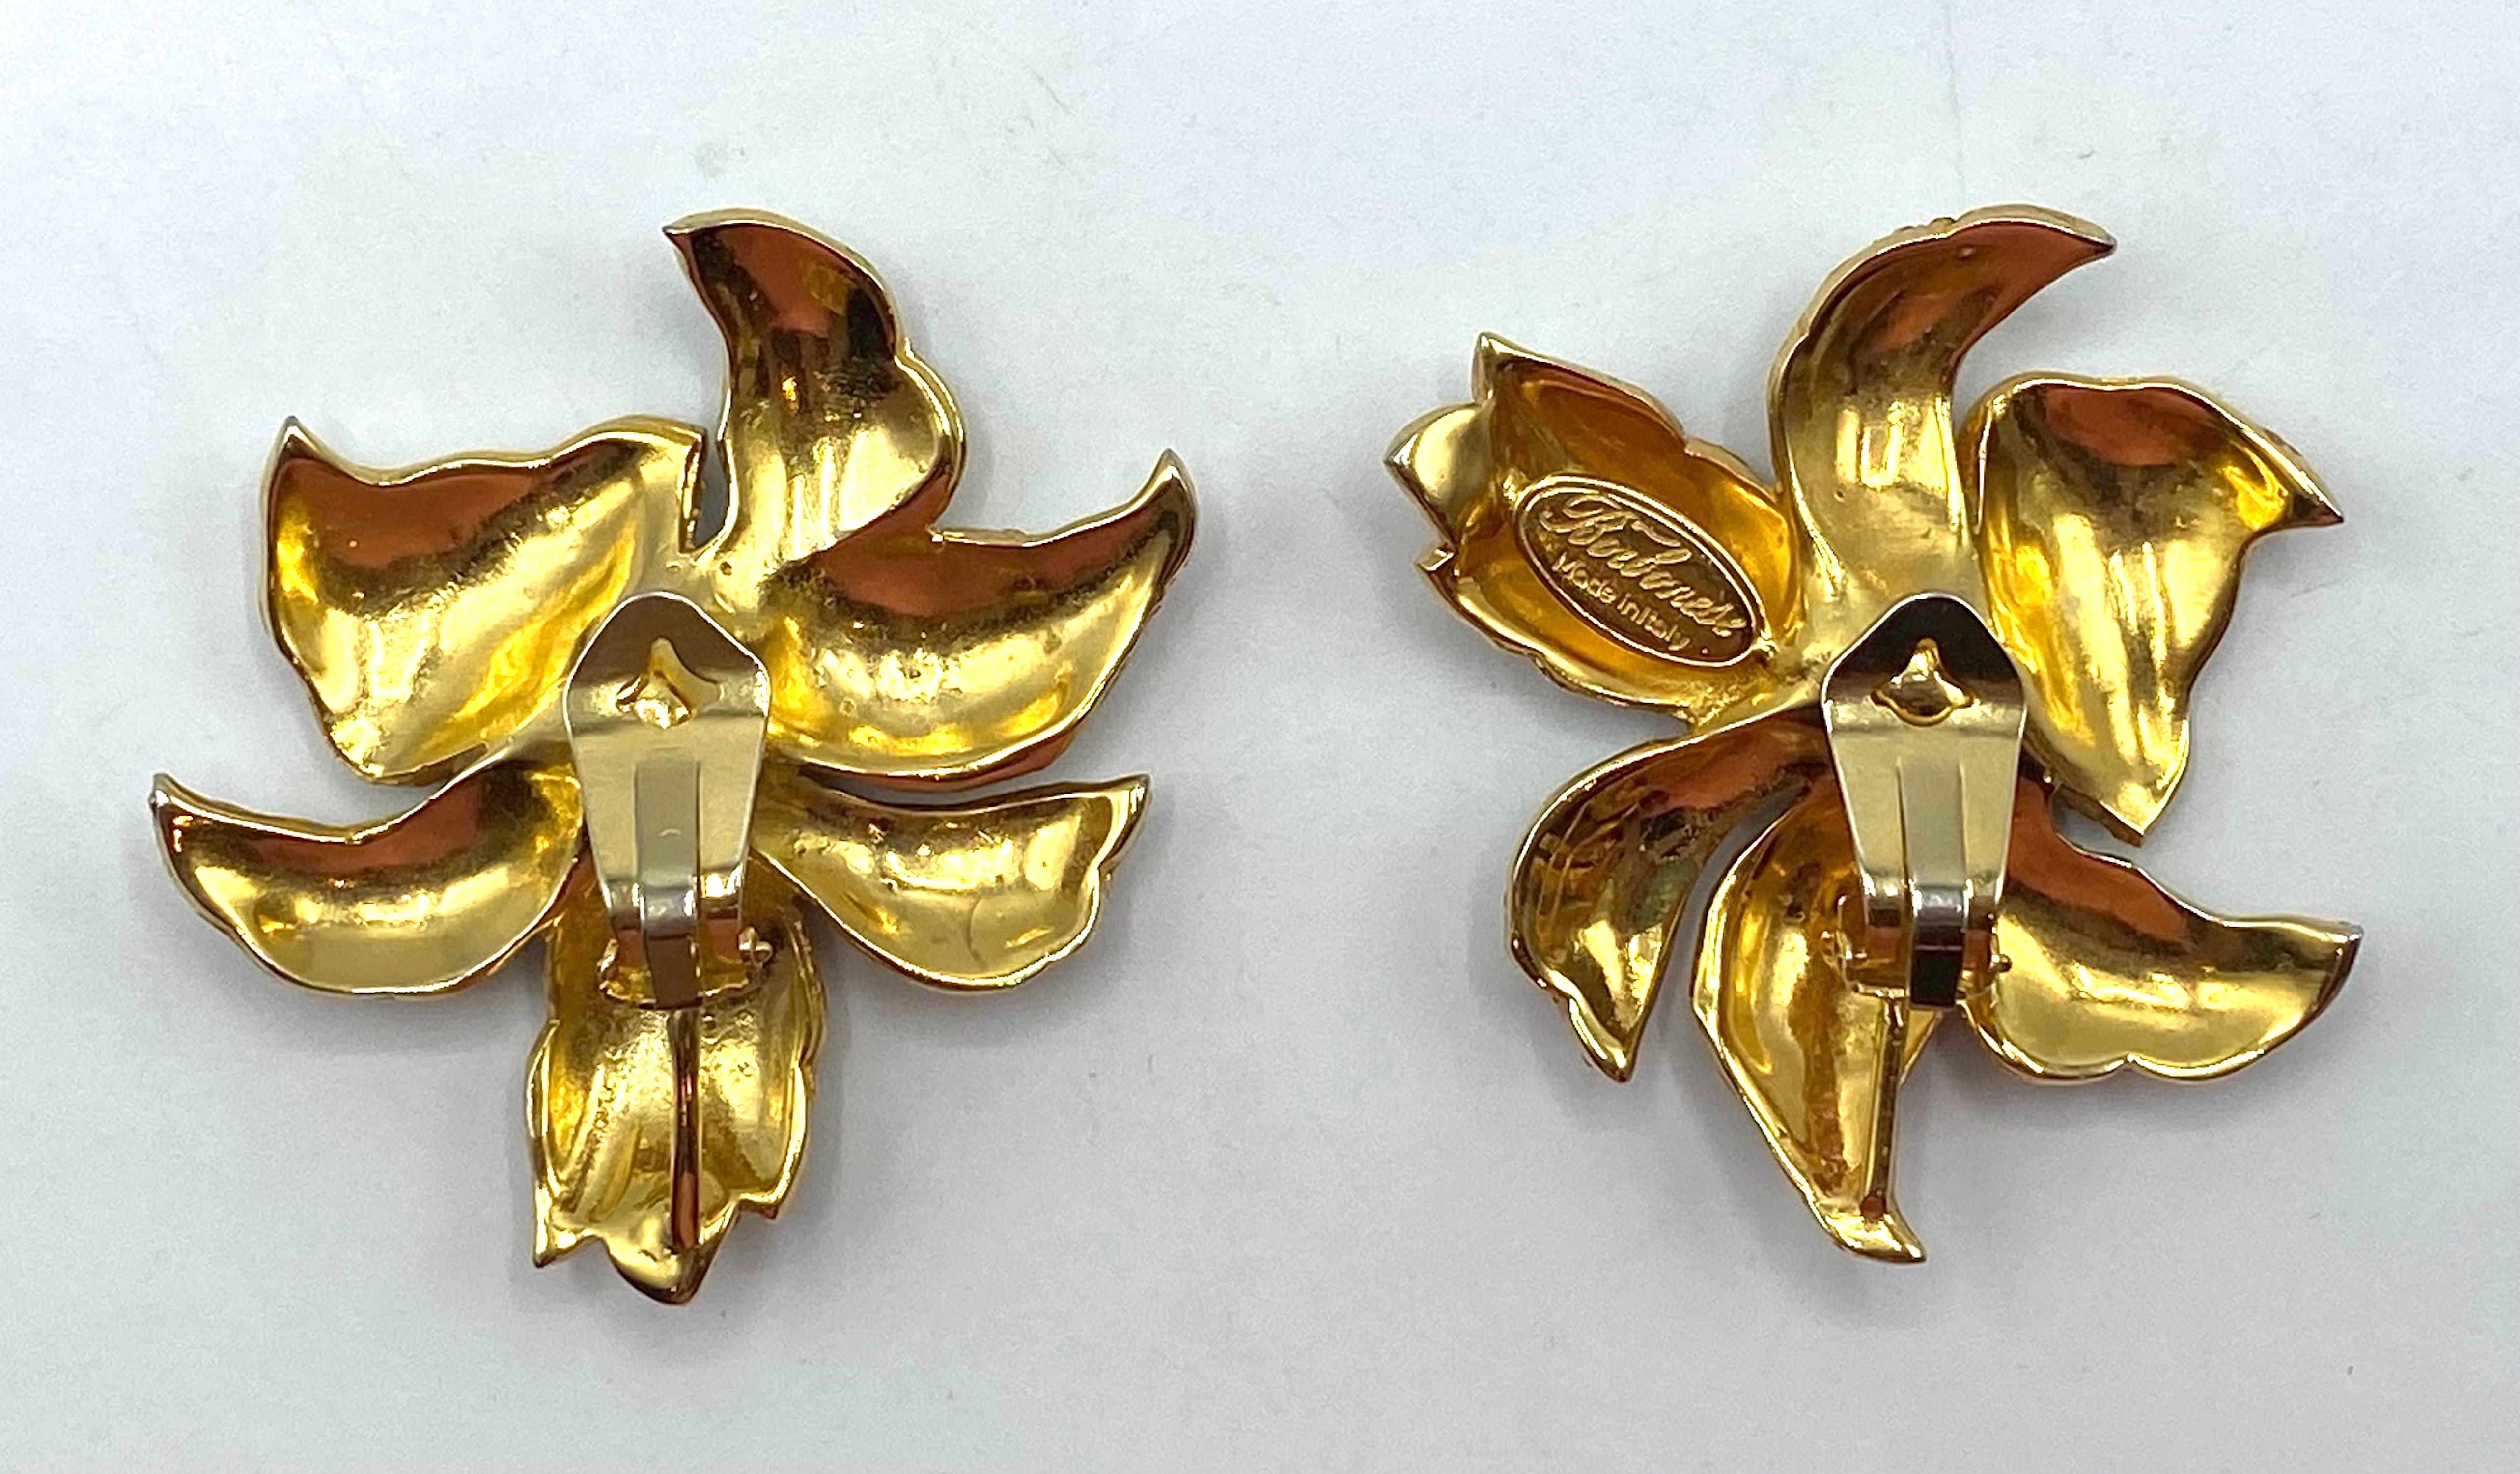 Borbonese, Italy Gold with Pave' Rhinestone Large Flower Earrings 4